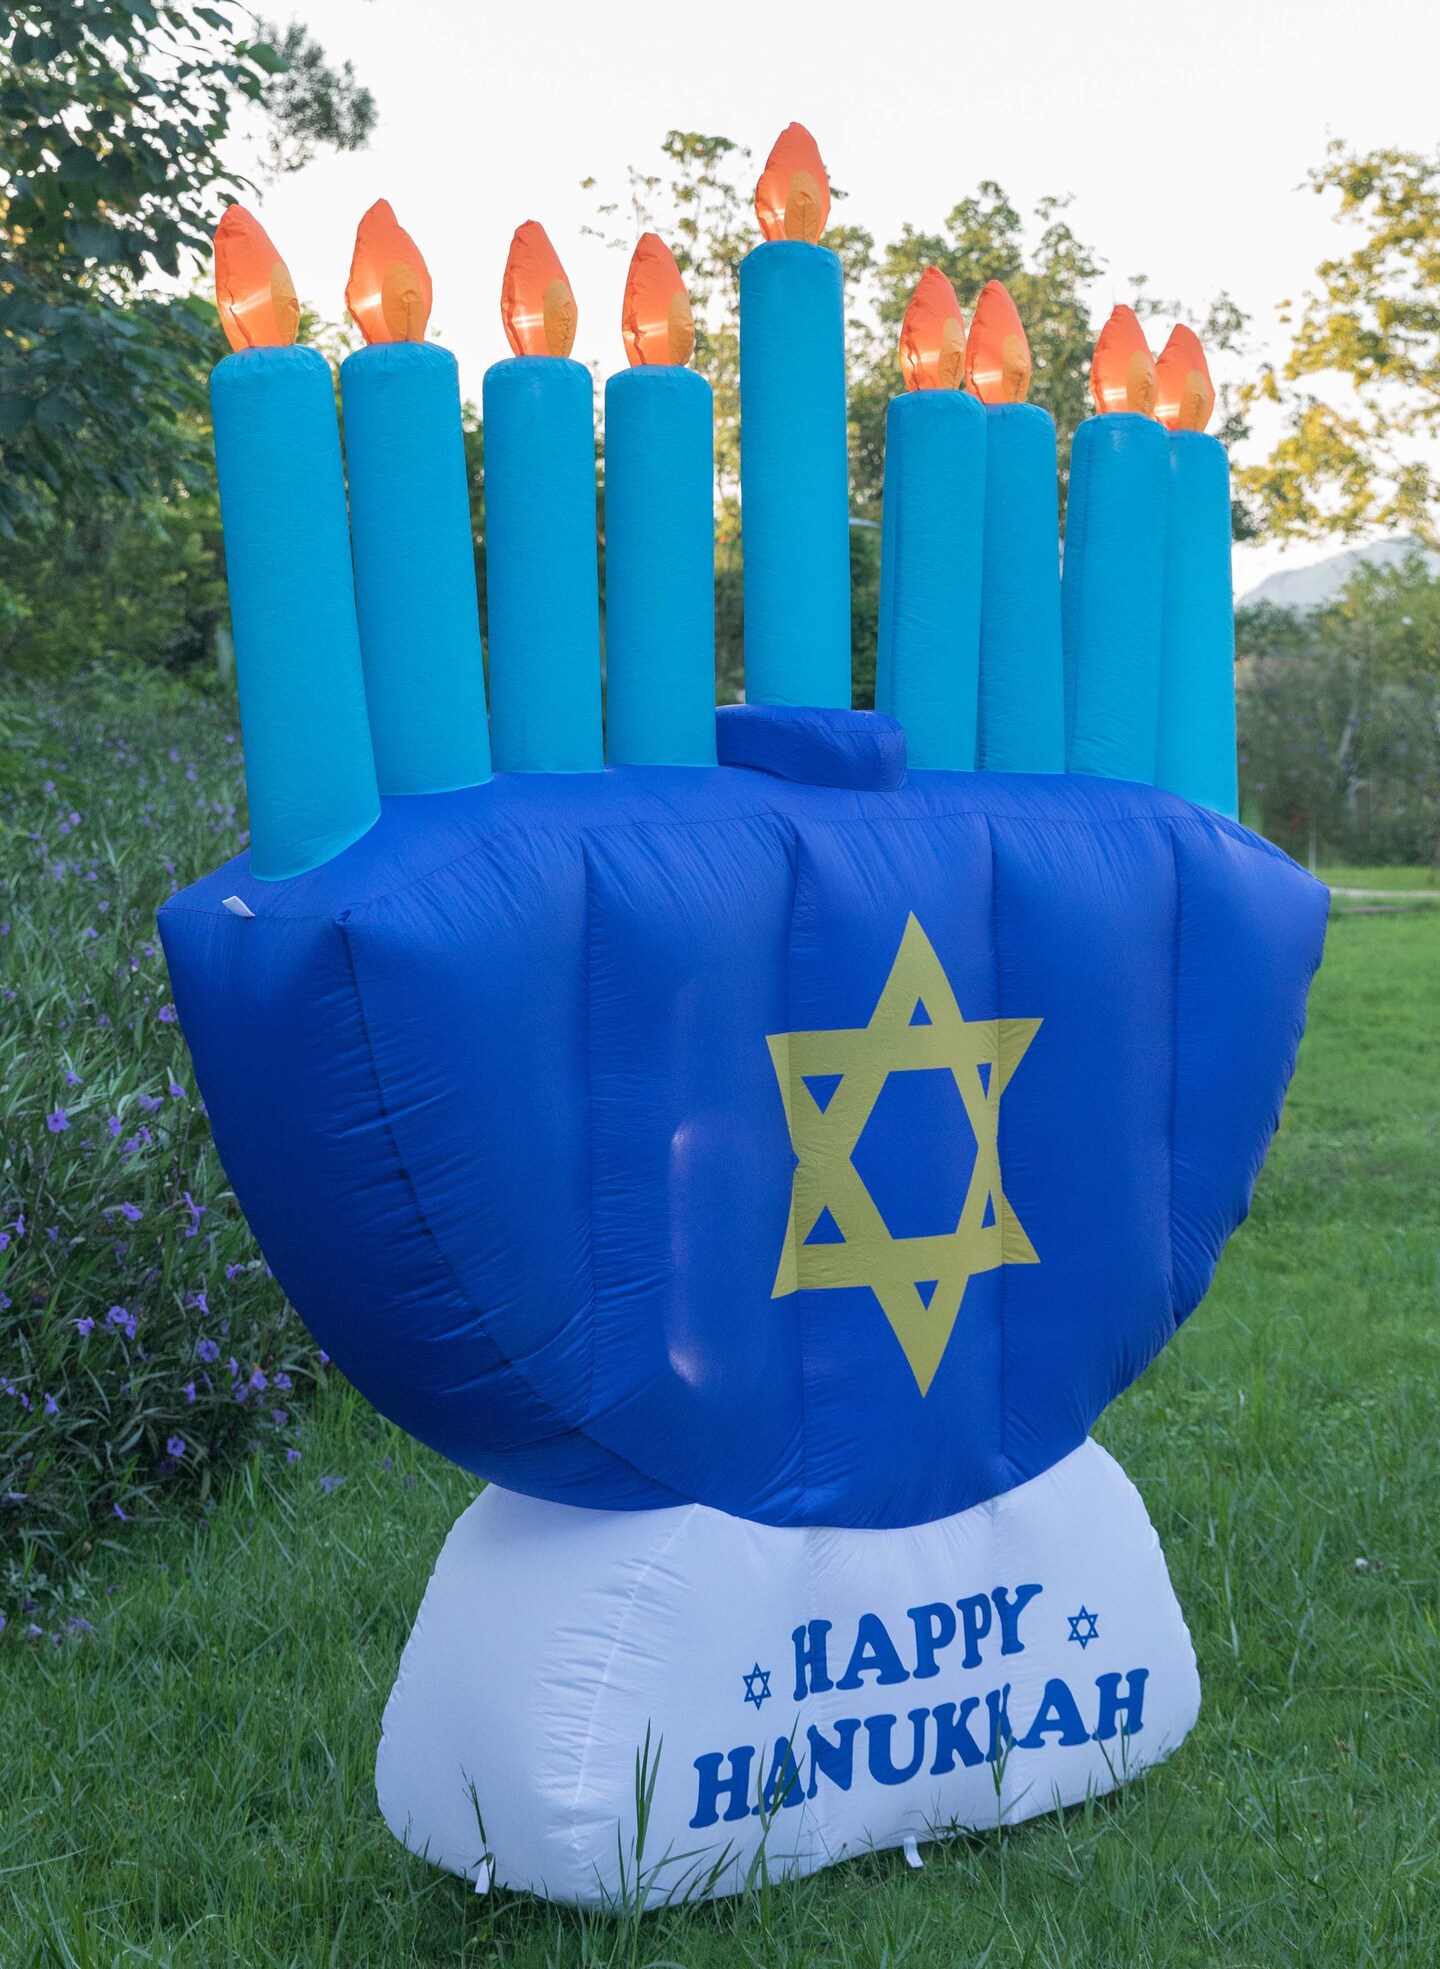 Giant Hanukkah Inflatable Menorah - Yard Decor with Built-in Bulbs, Tie-Down Points, and Powerful Built in Fan